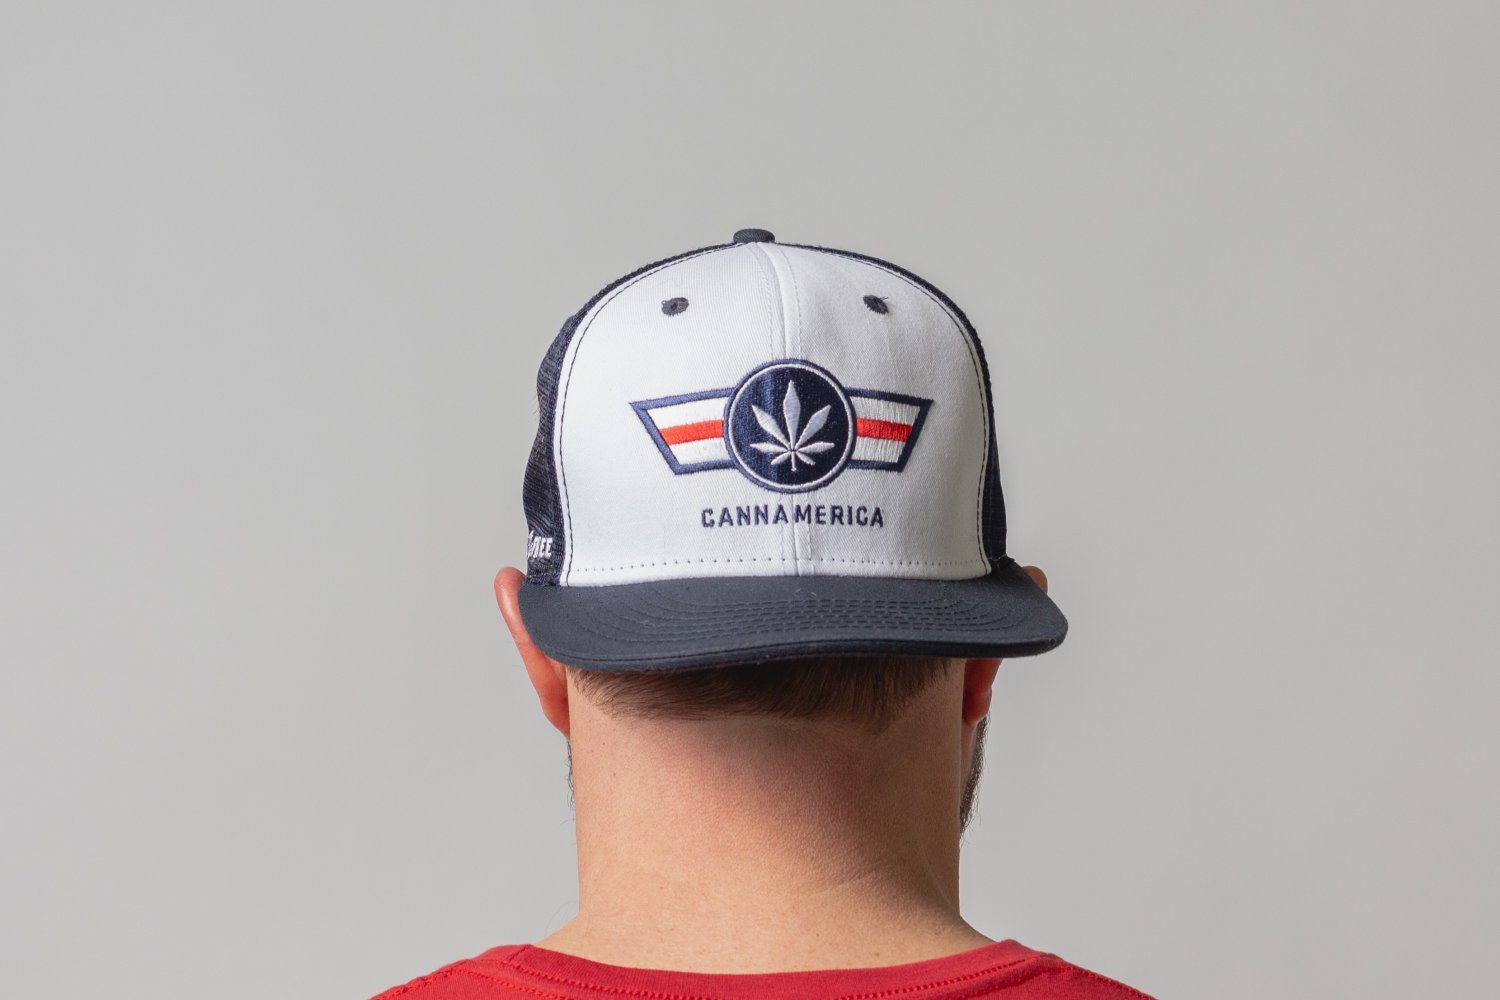 As CEO, CannAmerica’s Dan Anglin wants a piece of the hemp and CBD market. As a Marine, he wants veterans to have access to cannabis too.